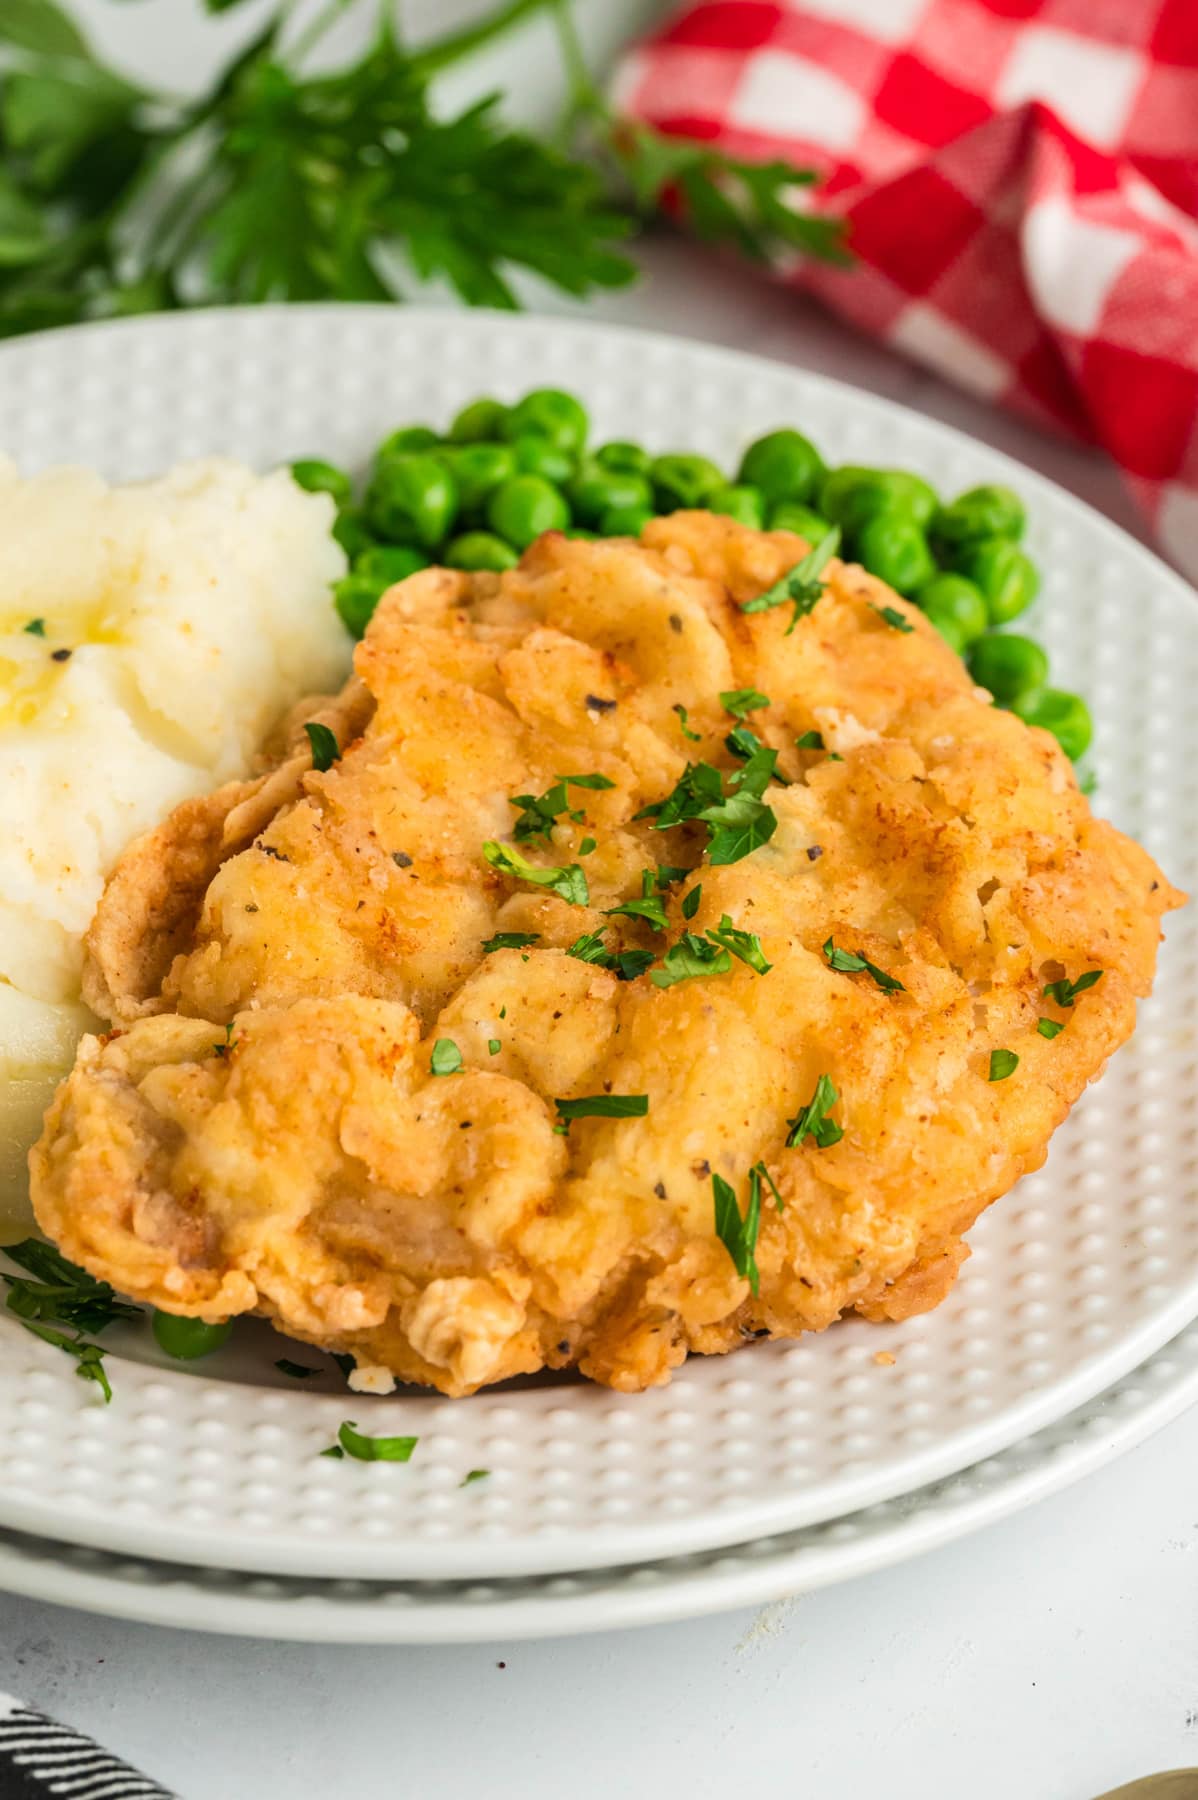 A breaded pork chop on a plate with mashed potatoes and peas